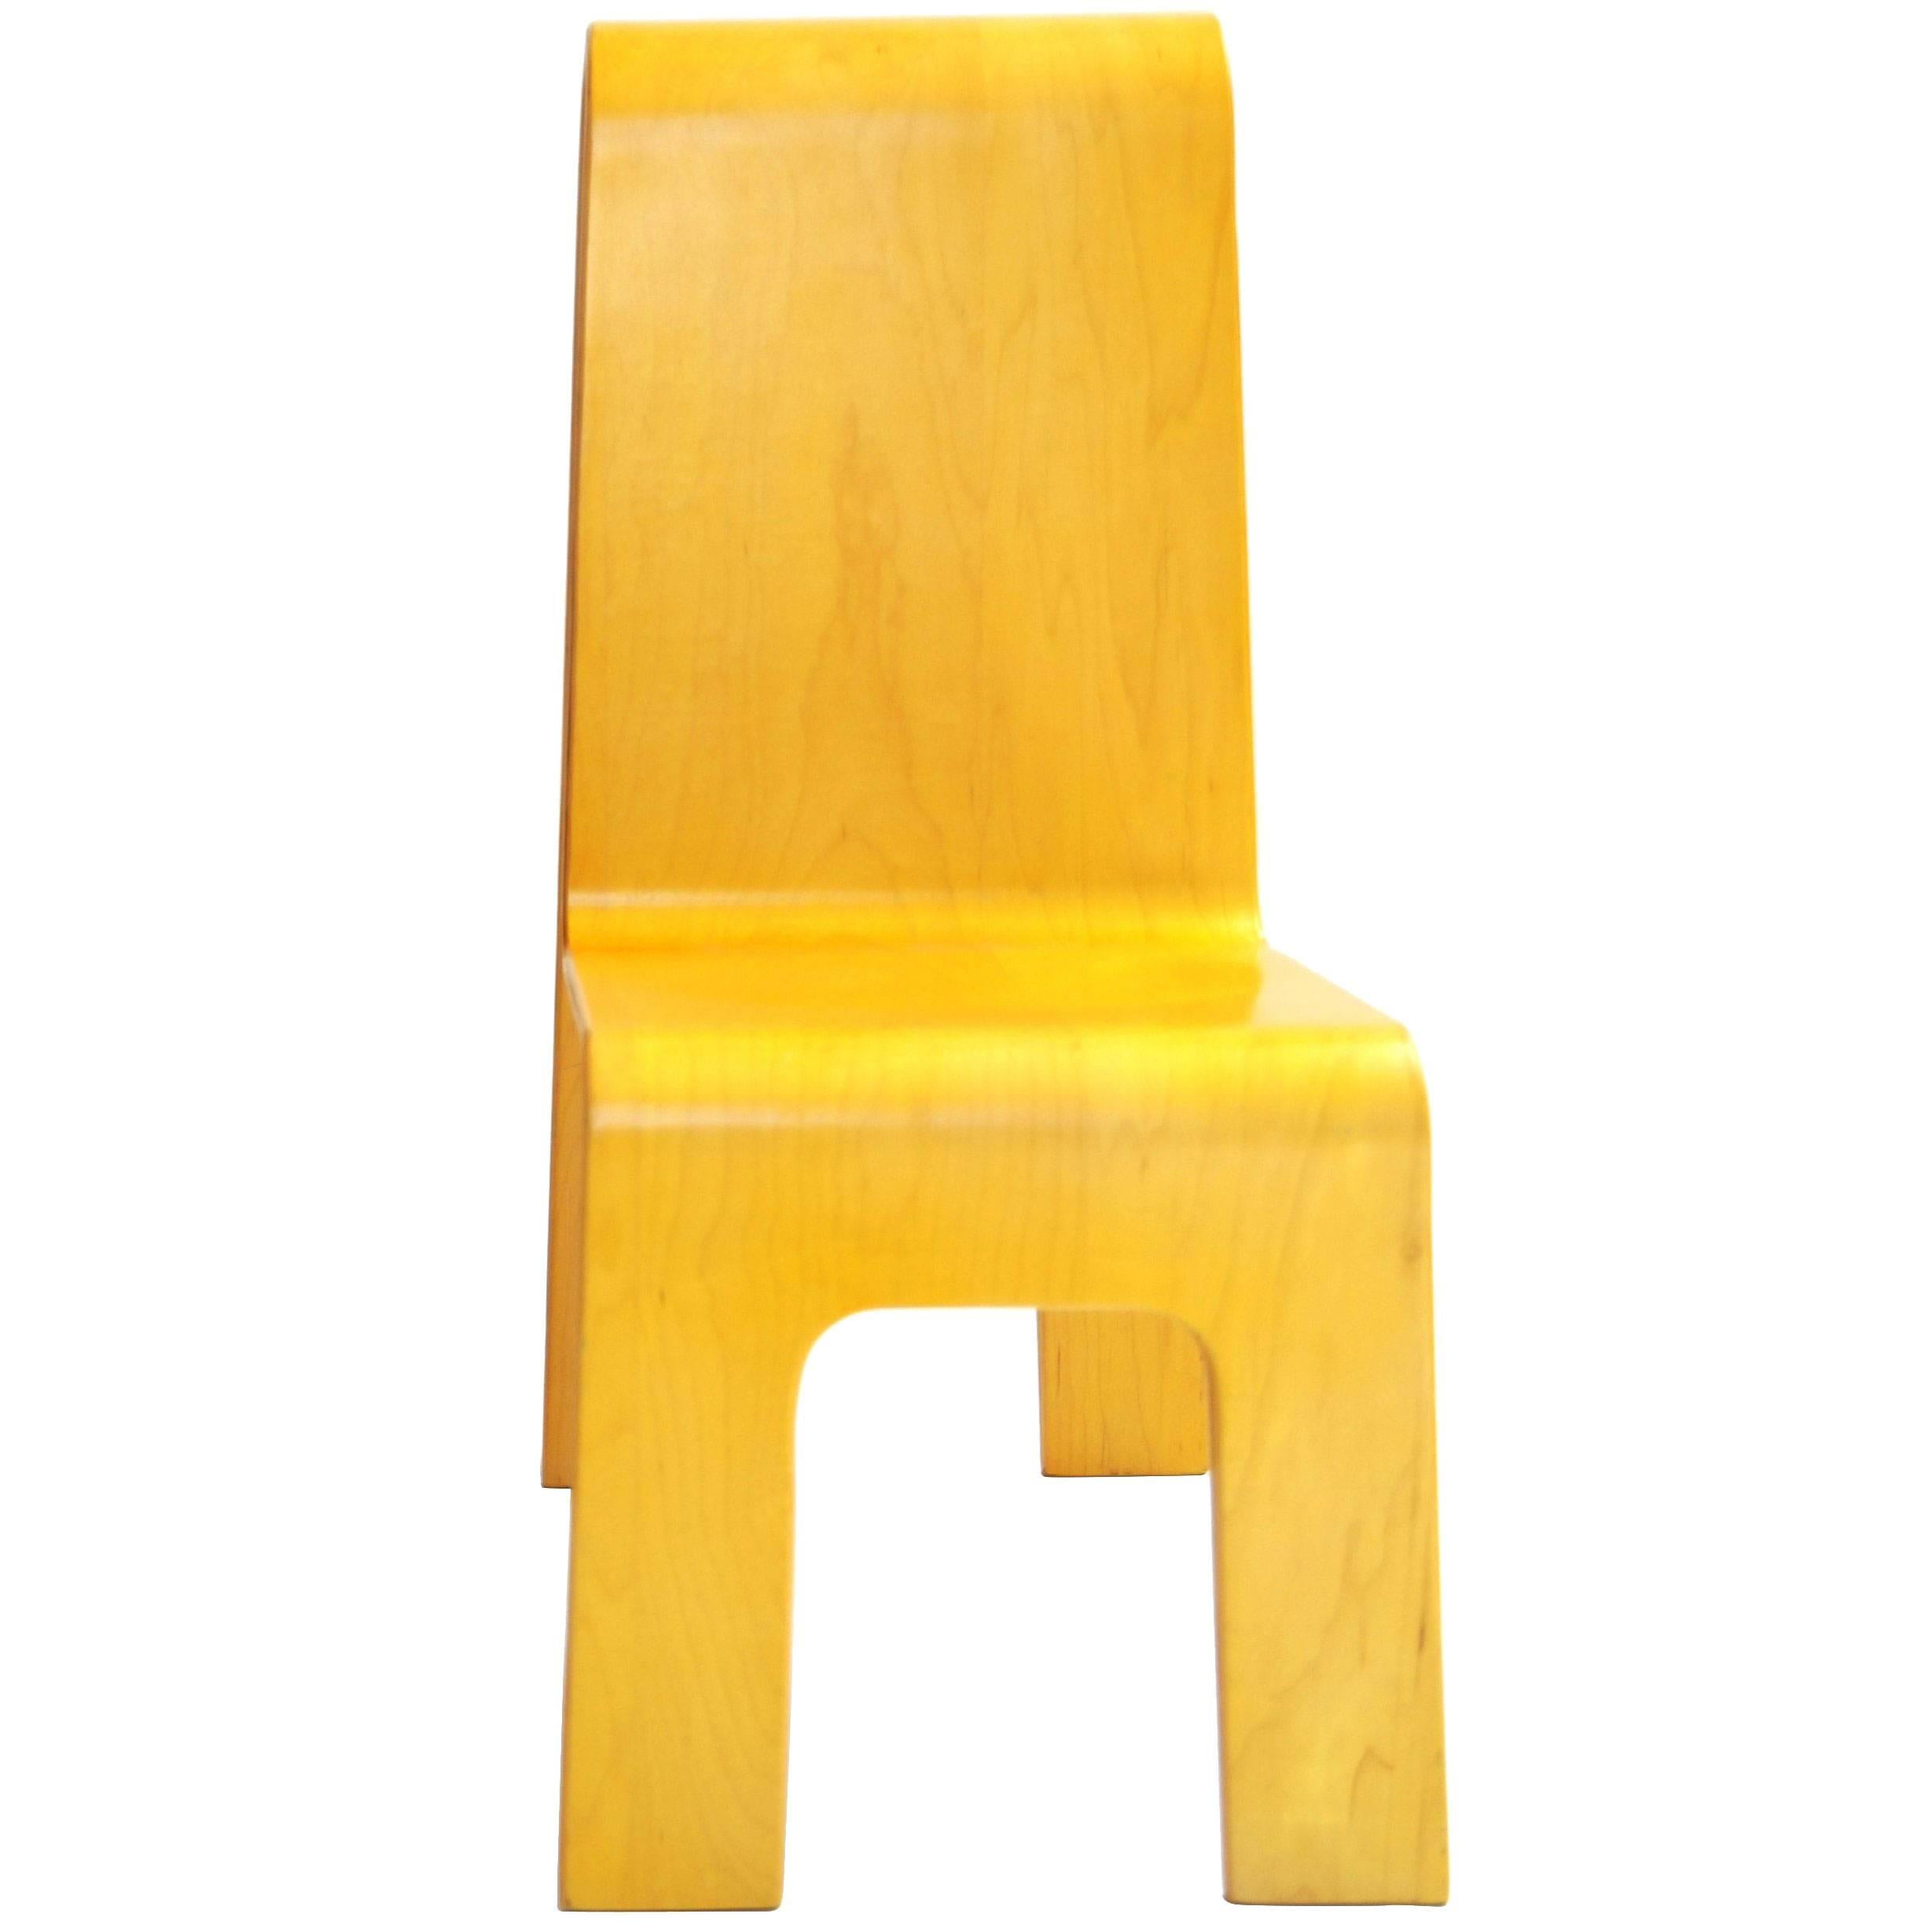 Kinder-Link Molded Maple Plywood Cut-Out Child Chair by Isku, Finland, in Yellow For Sale